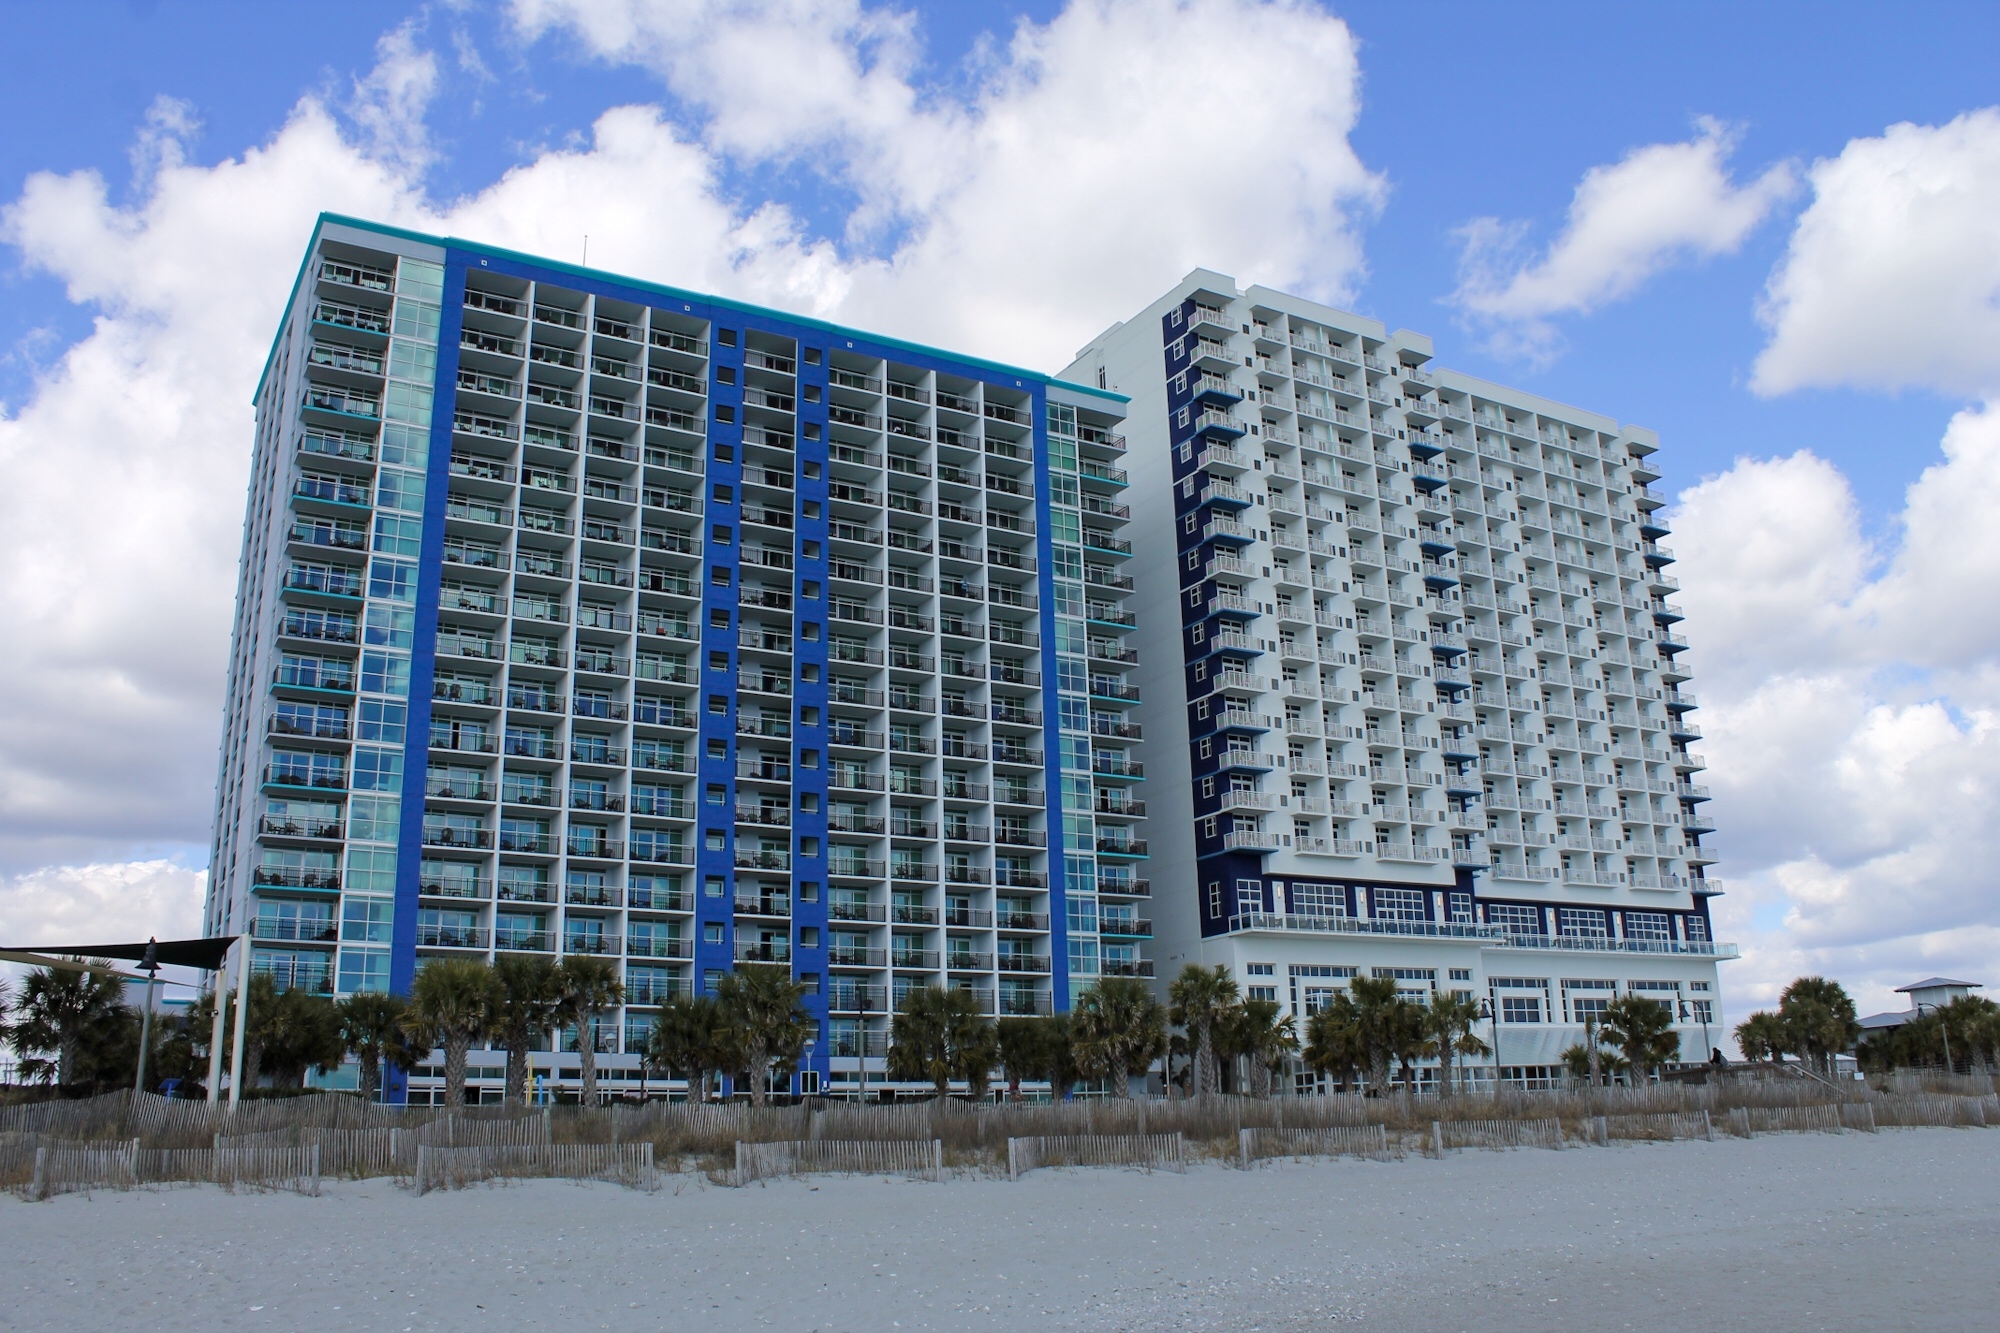 Where to Eat Play and Stay at Myrtle Beach | family beach vacation | Myrtle Beach with kids | beach trip with children | myrtle beach for families | beach condos | condo at Myrtle Beach